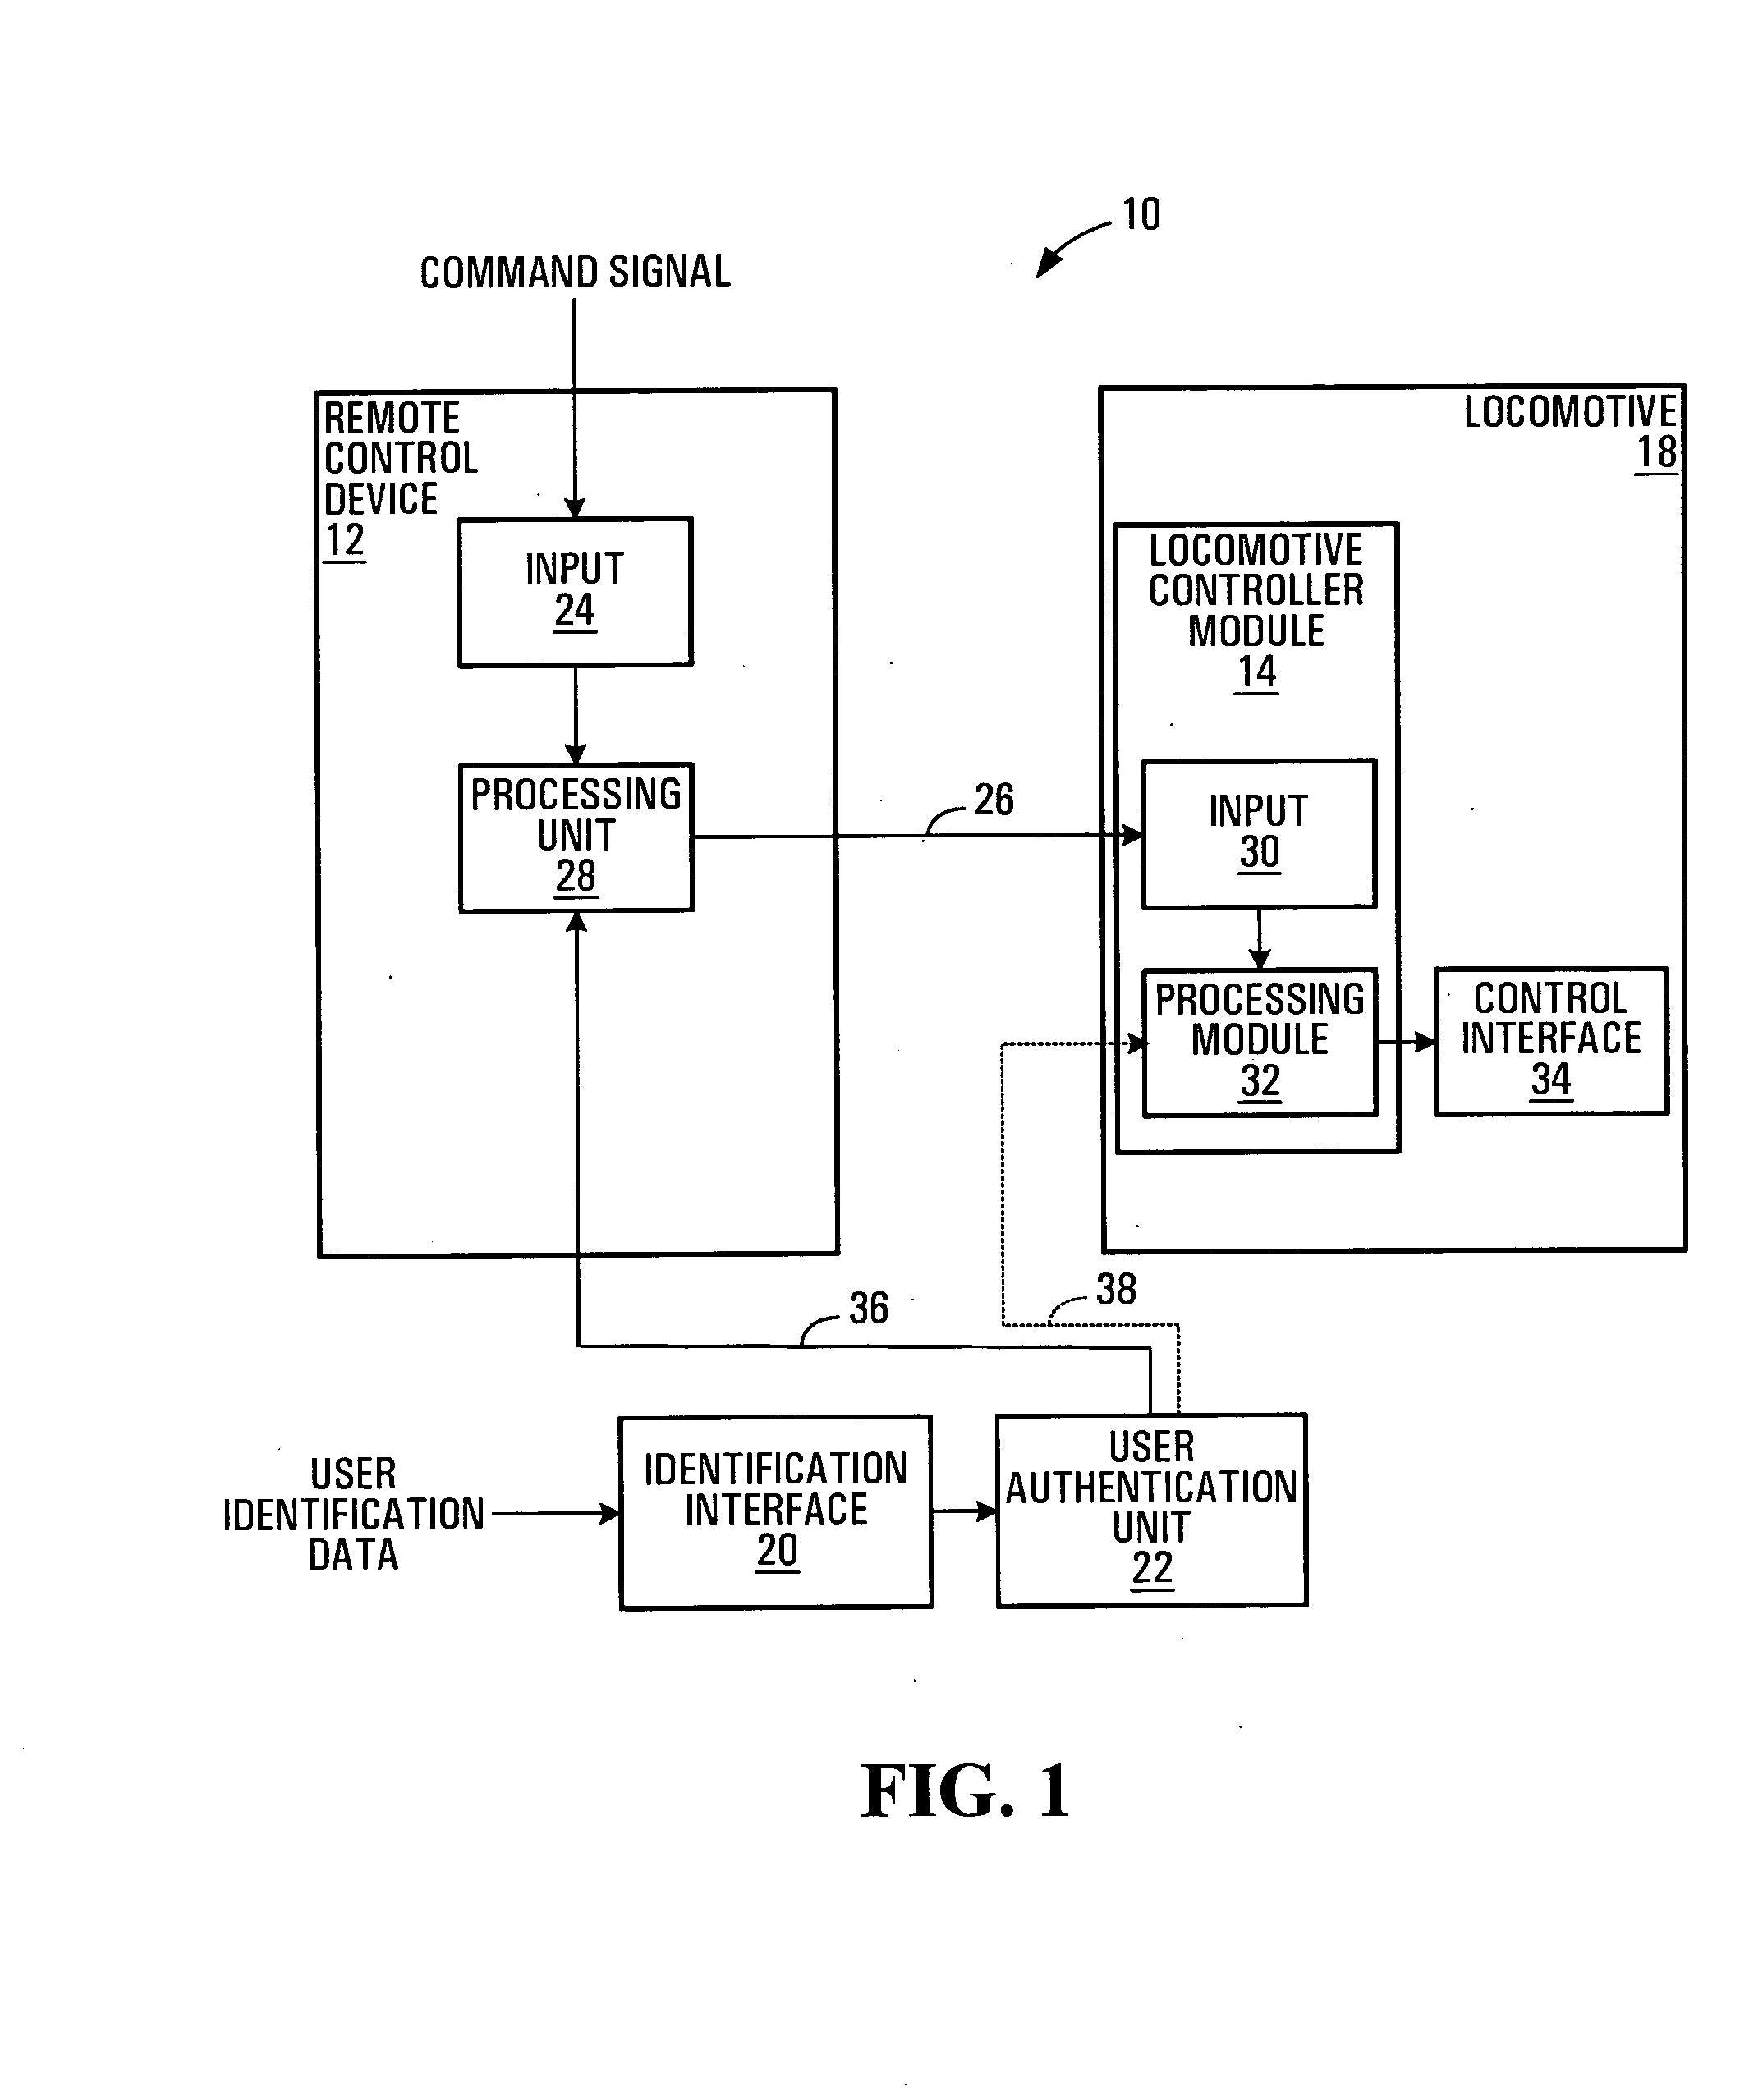 Remote control system for a locomotive having user authentication capabilities